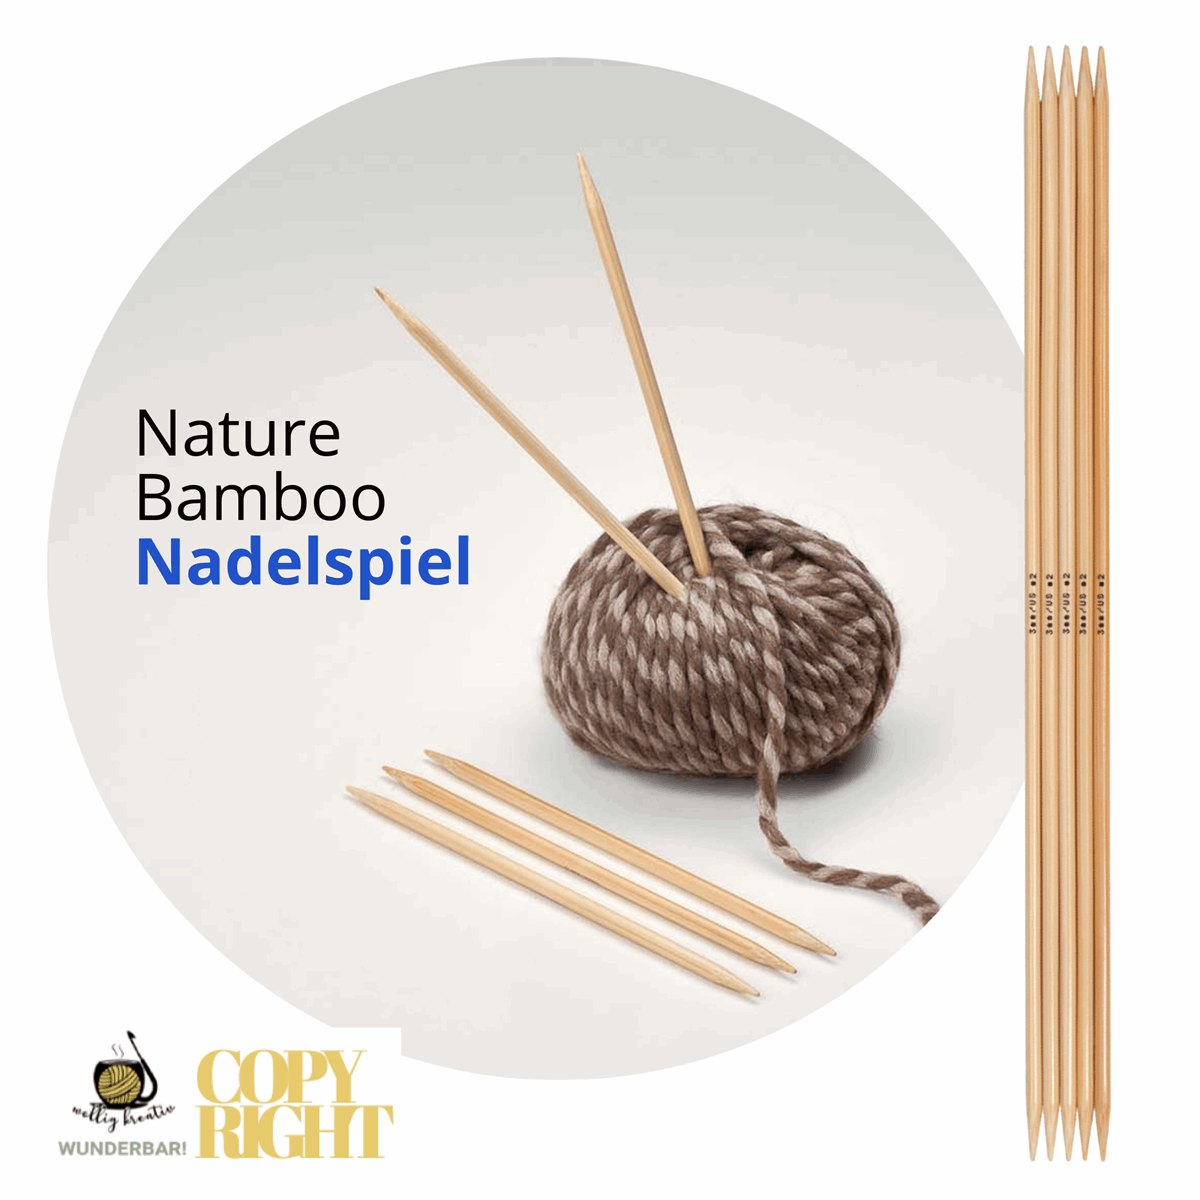 Addi, Nature Bamboo double pointed needles, 65012, size 6 length 15 cm